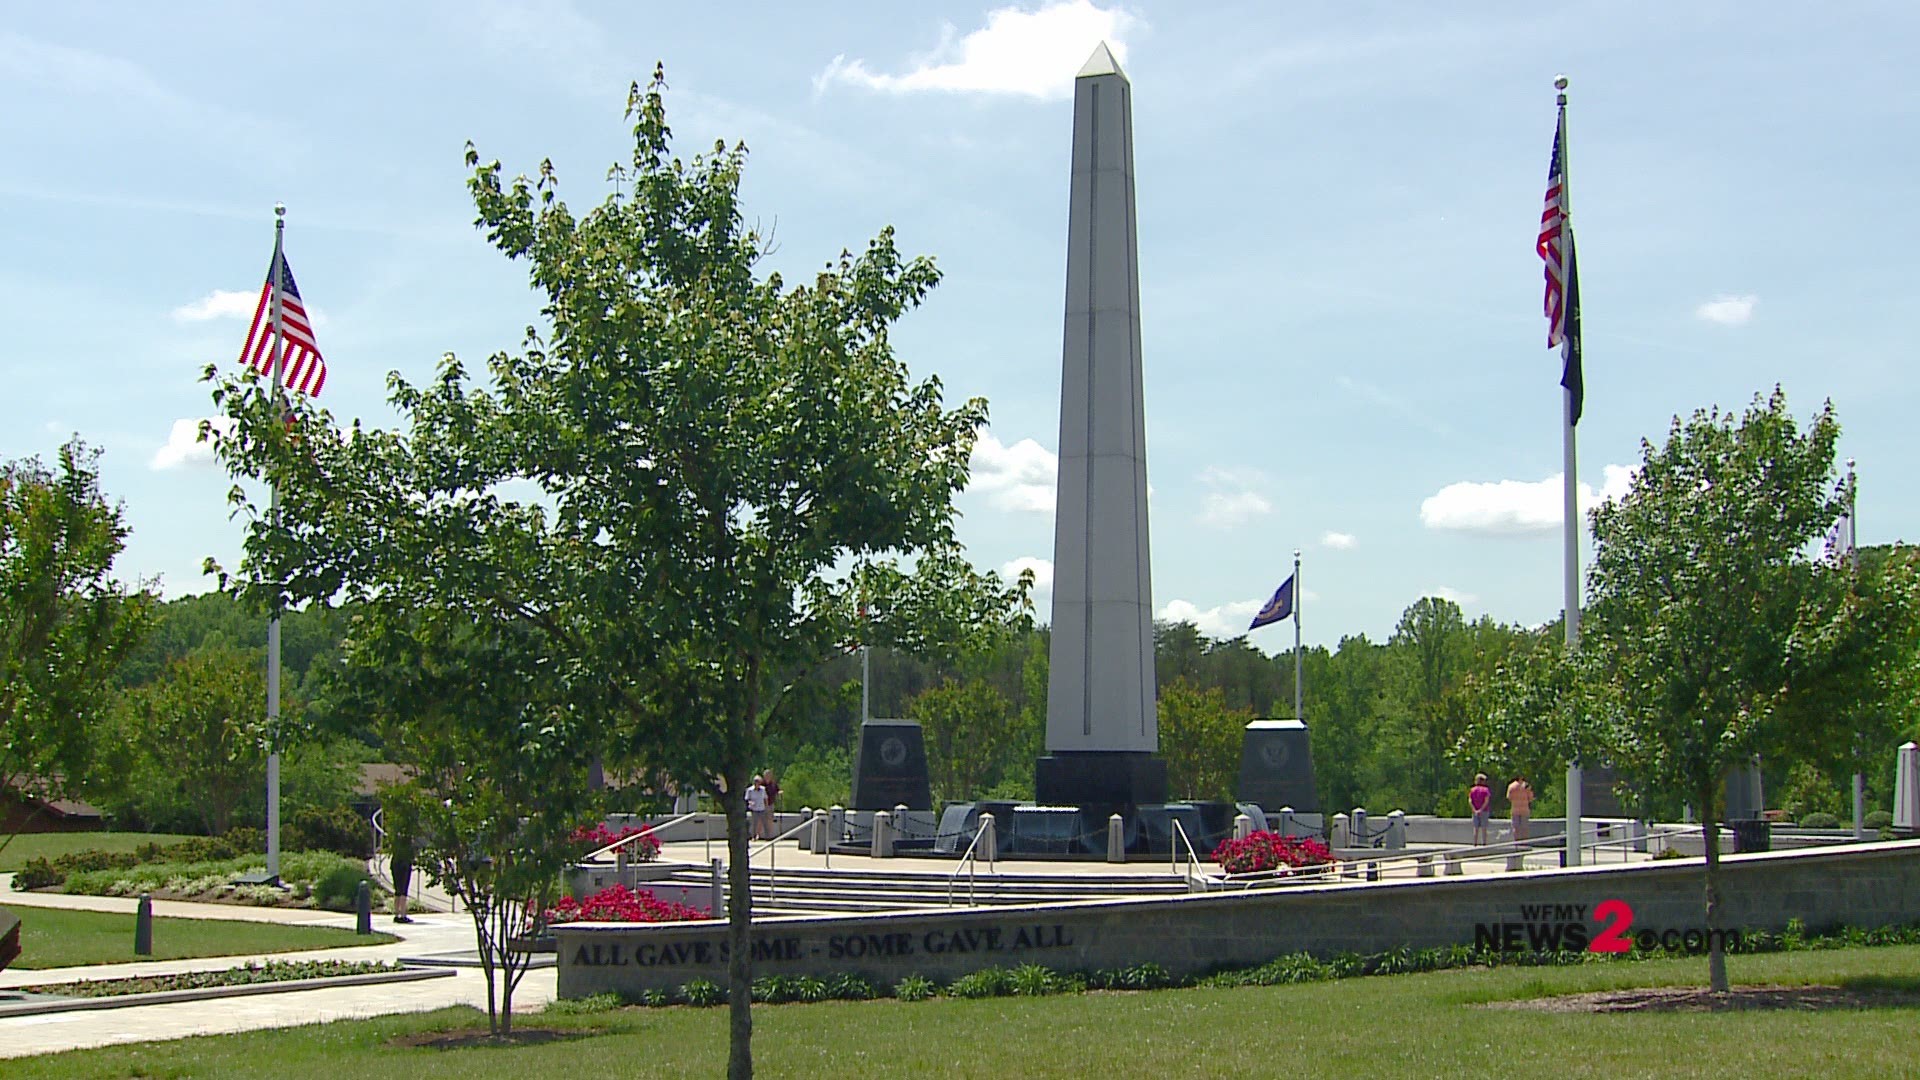 Here's a look around Carolina Field of Honor in Kernersville this Memorial Day weekend. It is the largest veterans' memorial on the east coast outside of D.C.